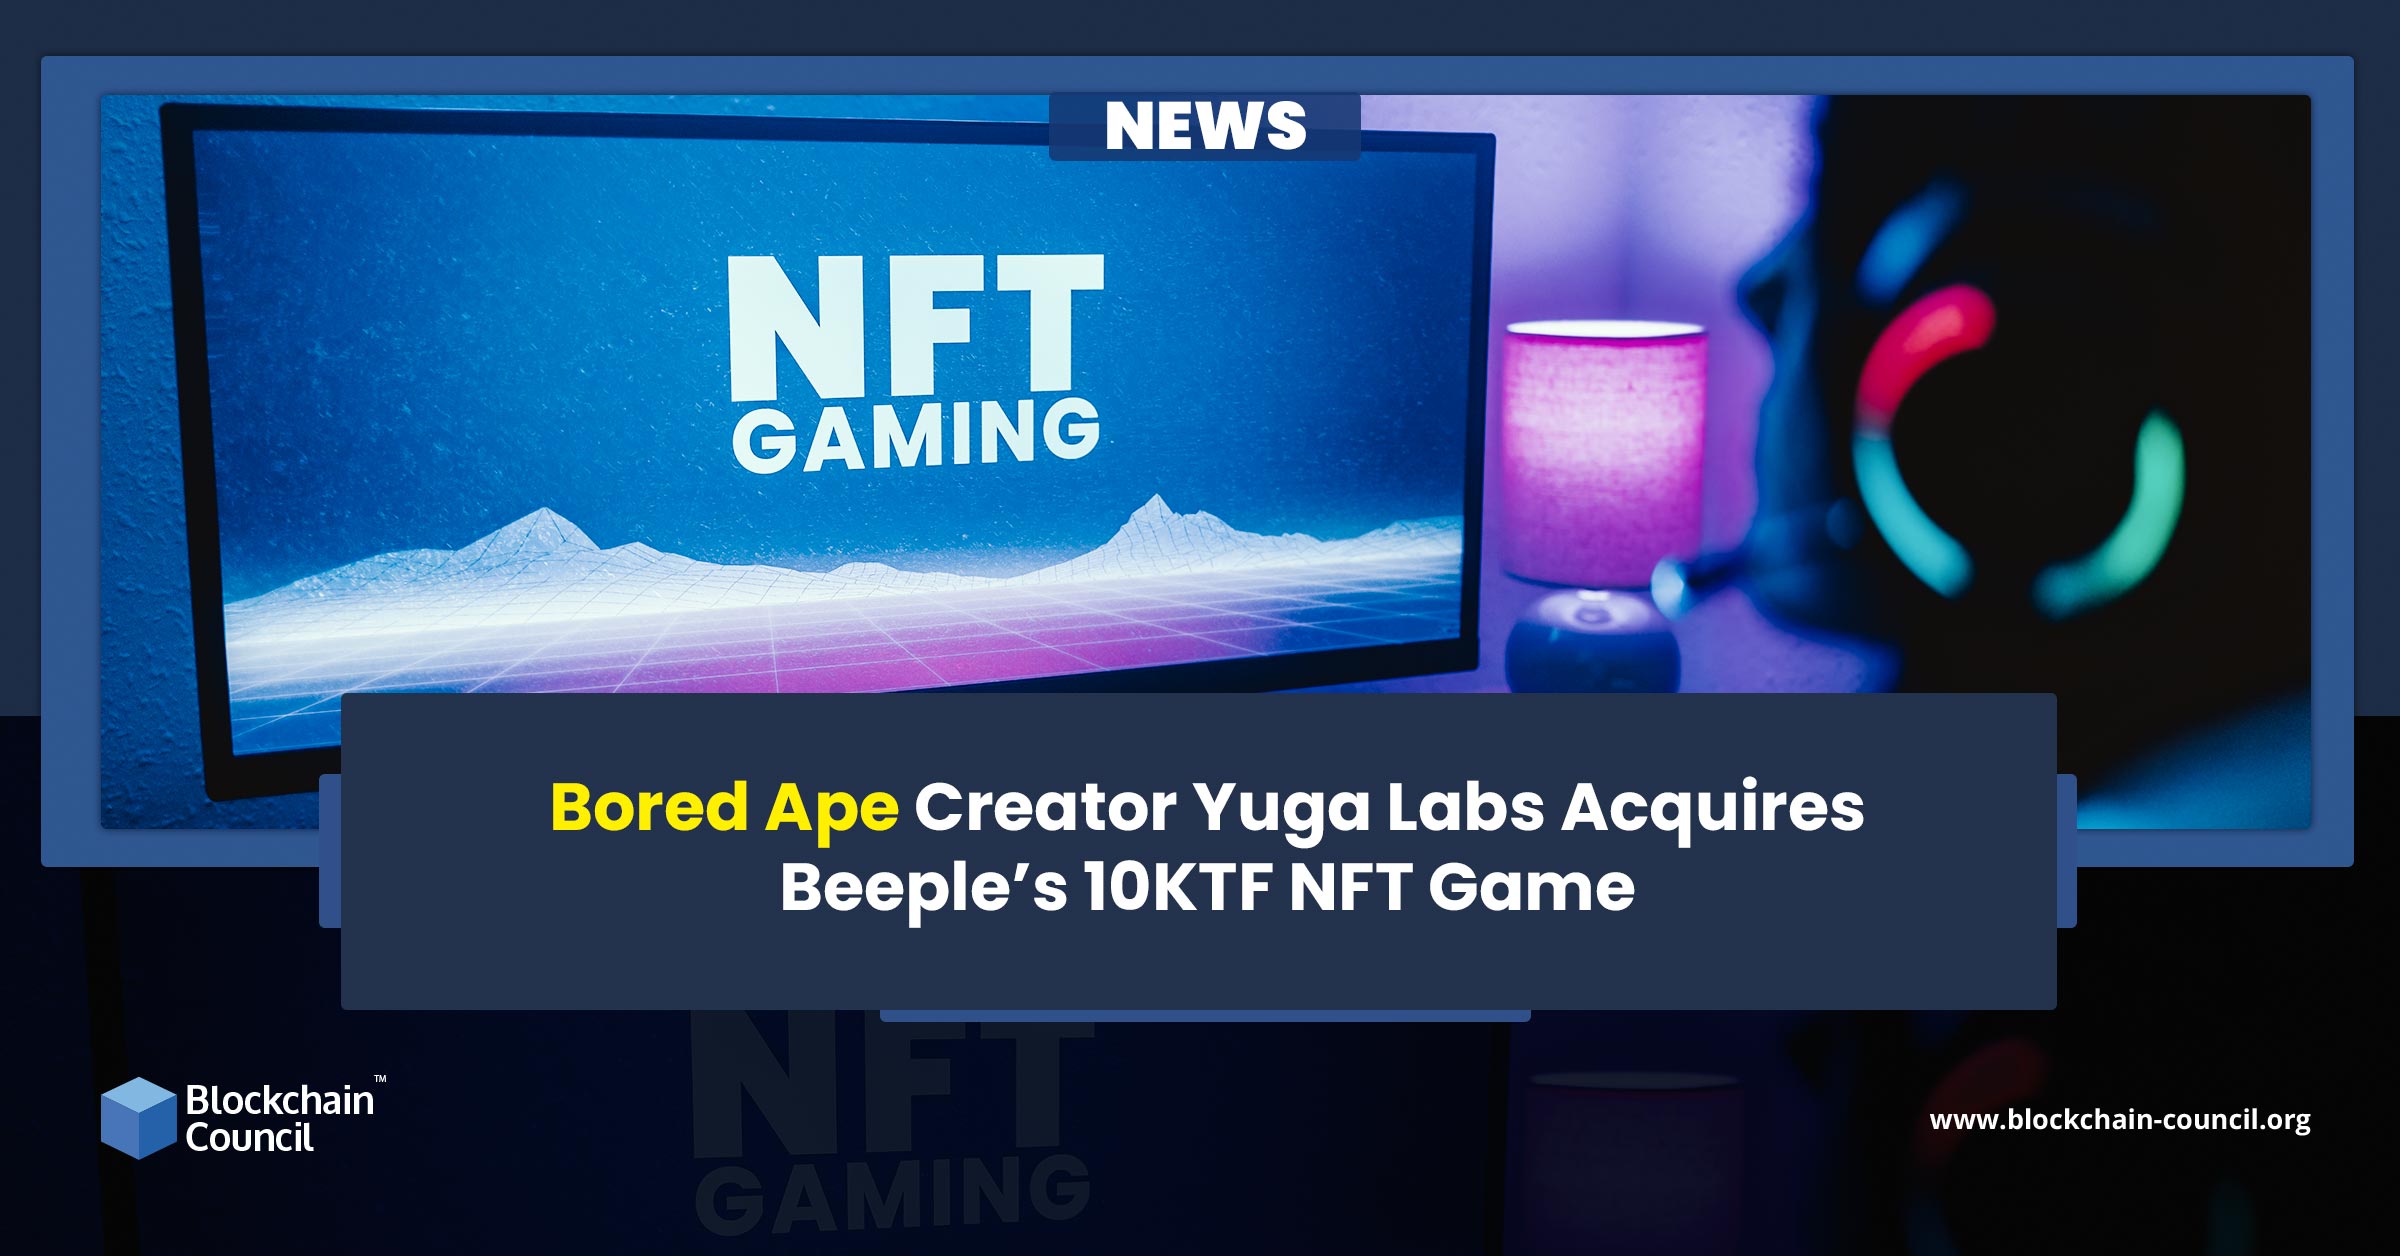 Bored Ape Creator Yuga Labs Acquires Beeple’s 10KTF NFT Game